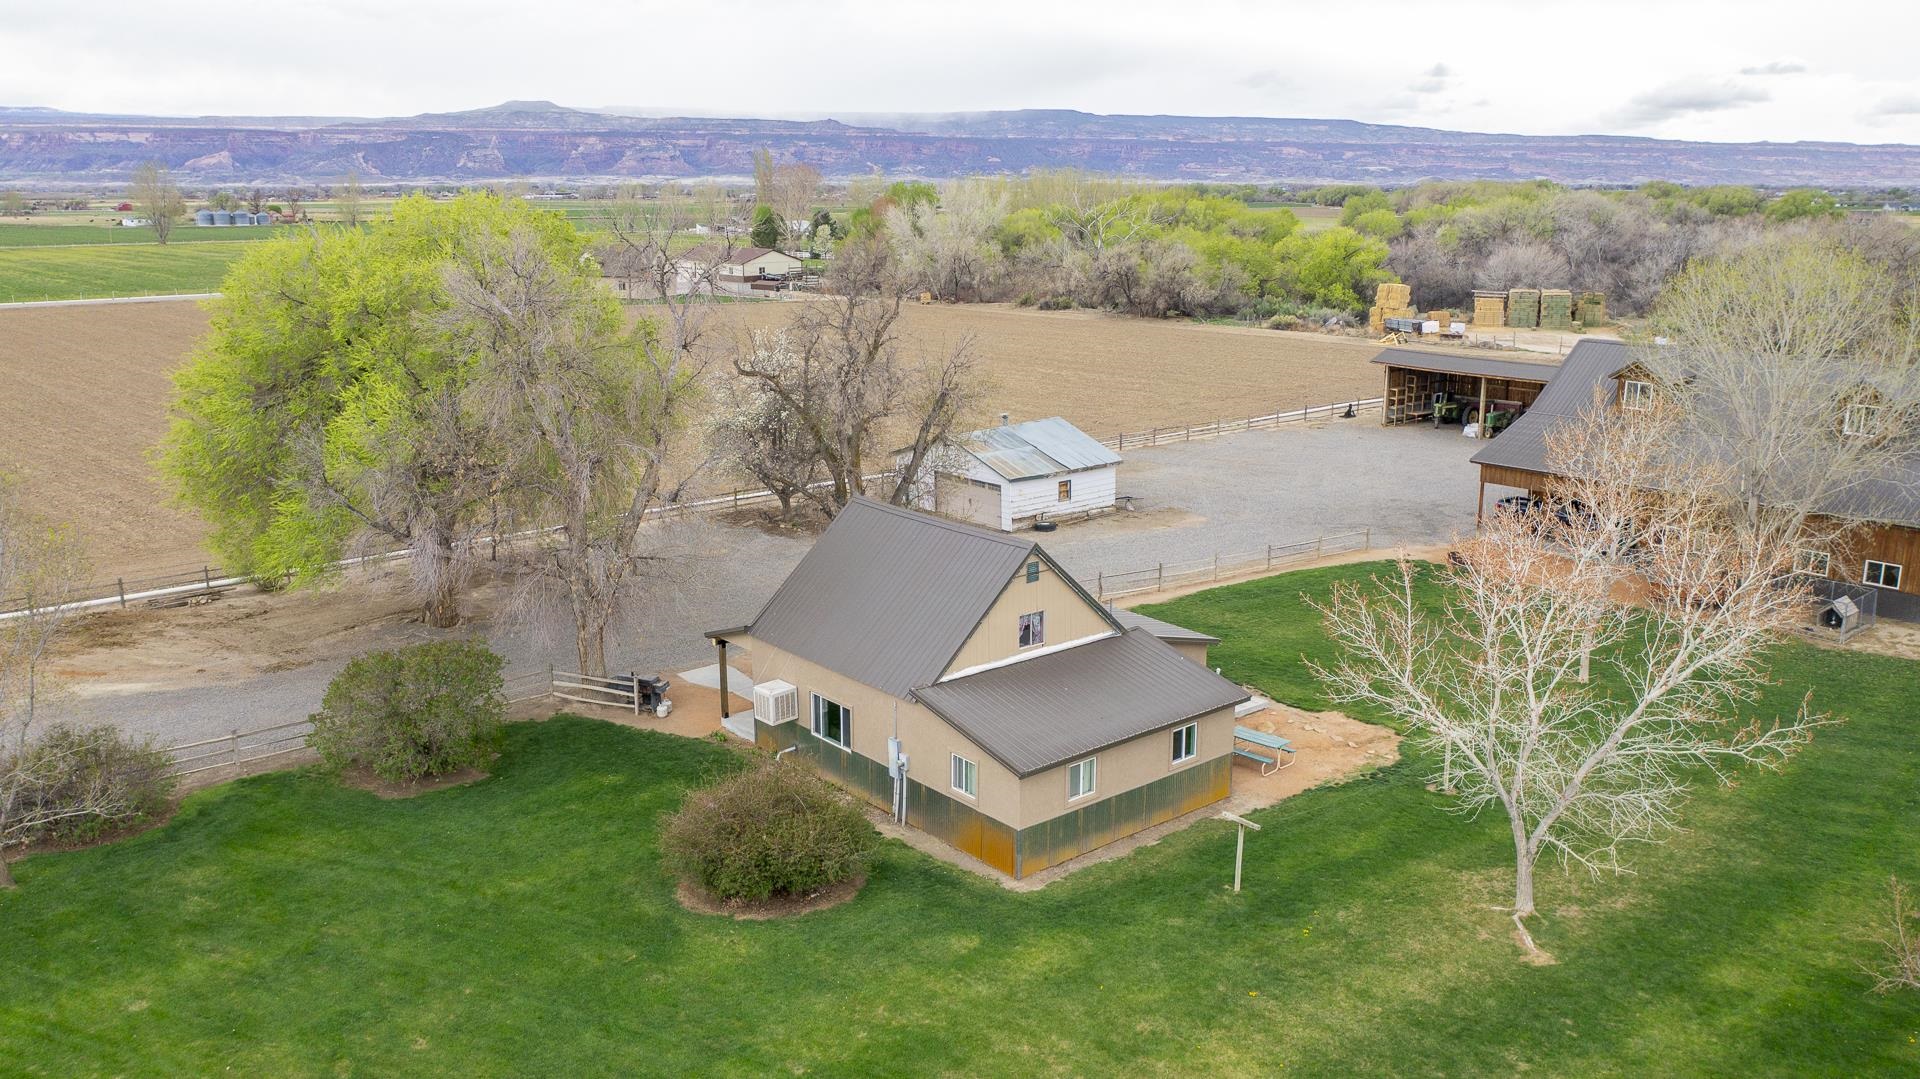 1351 21 Road, Grand Junction, CO 